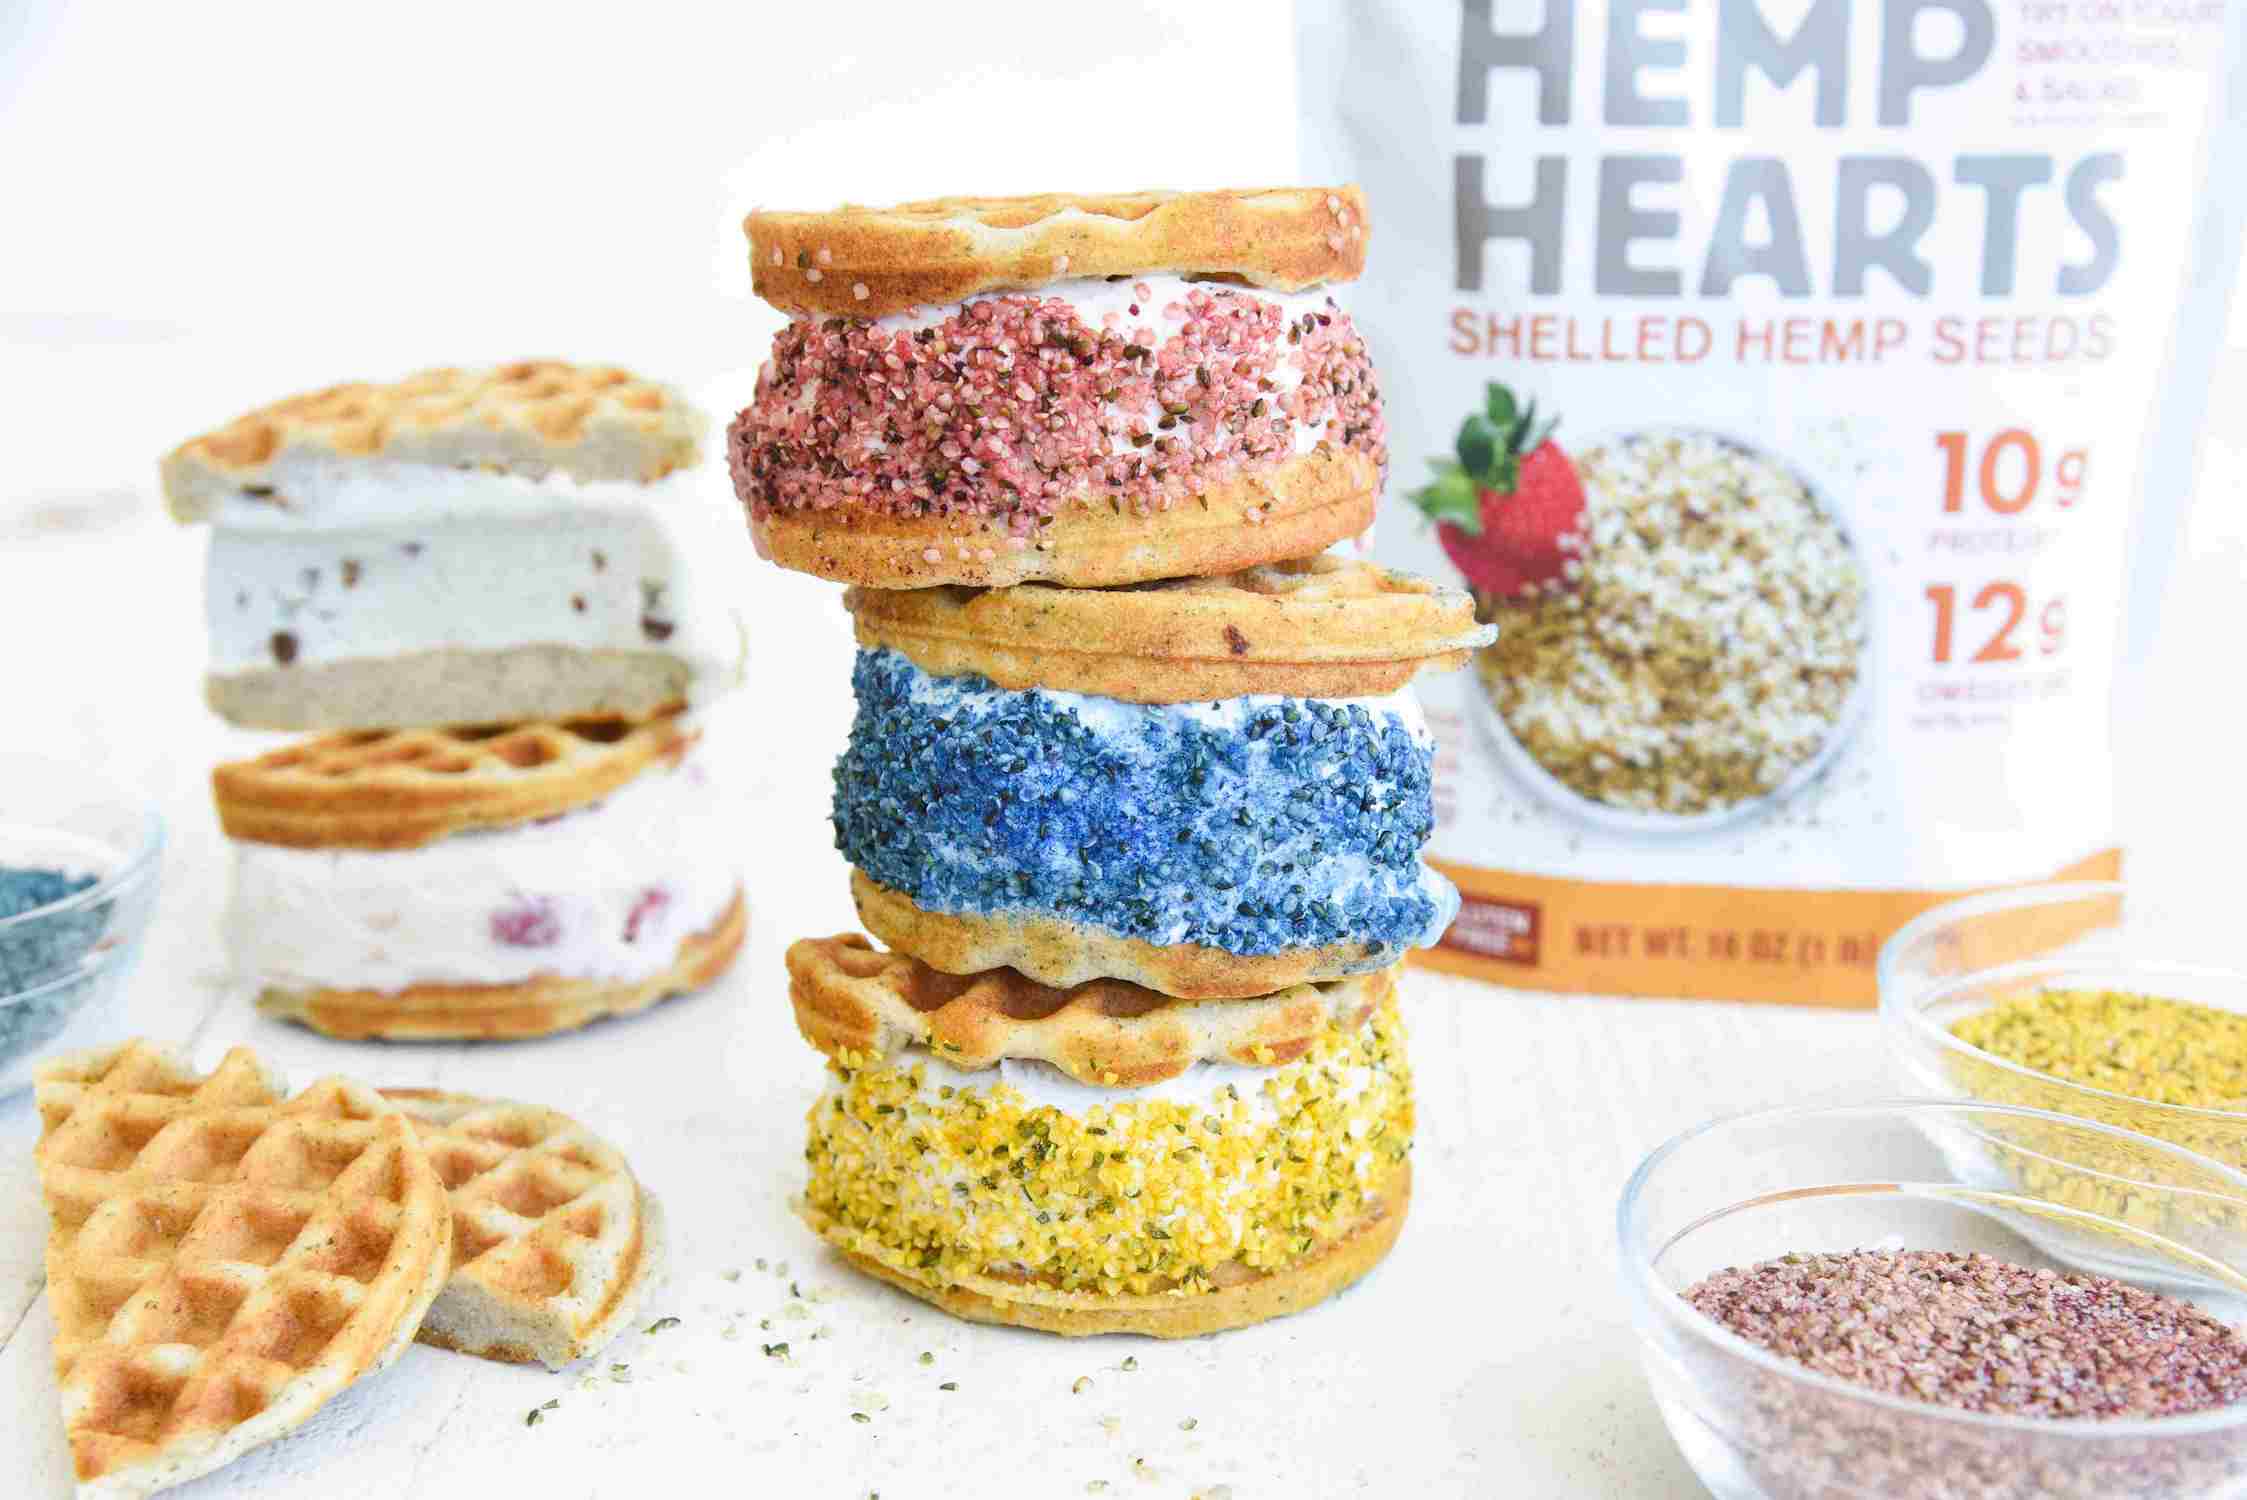 A stack of three ice cream sandwiches decorated in pink, blue and yellow dyed hemp hearts with a bag of Manitoba Harvest Hemp Hearts in the background.